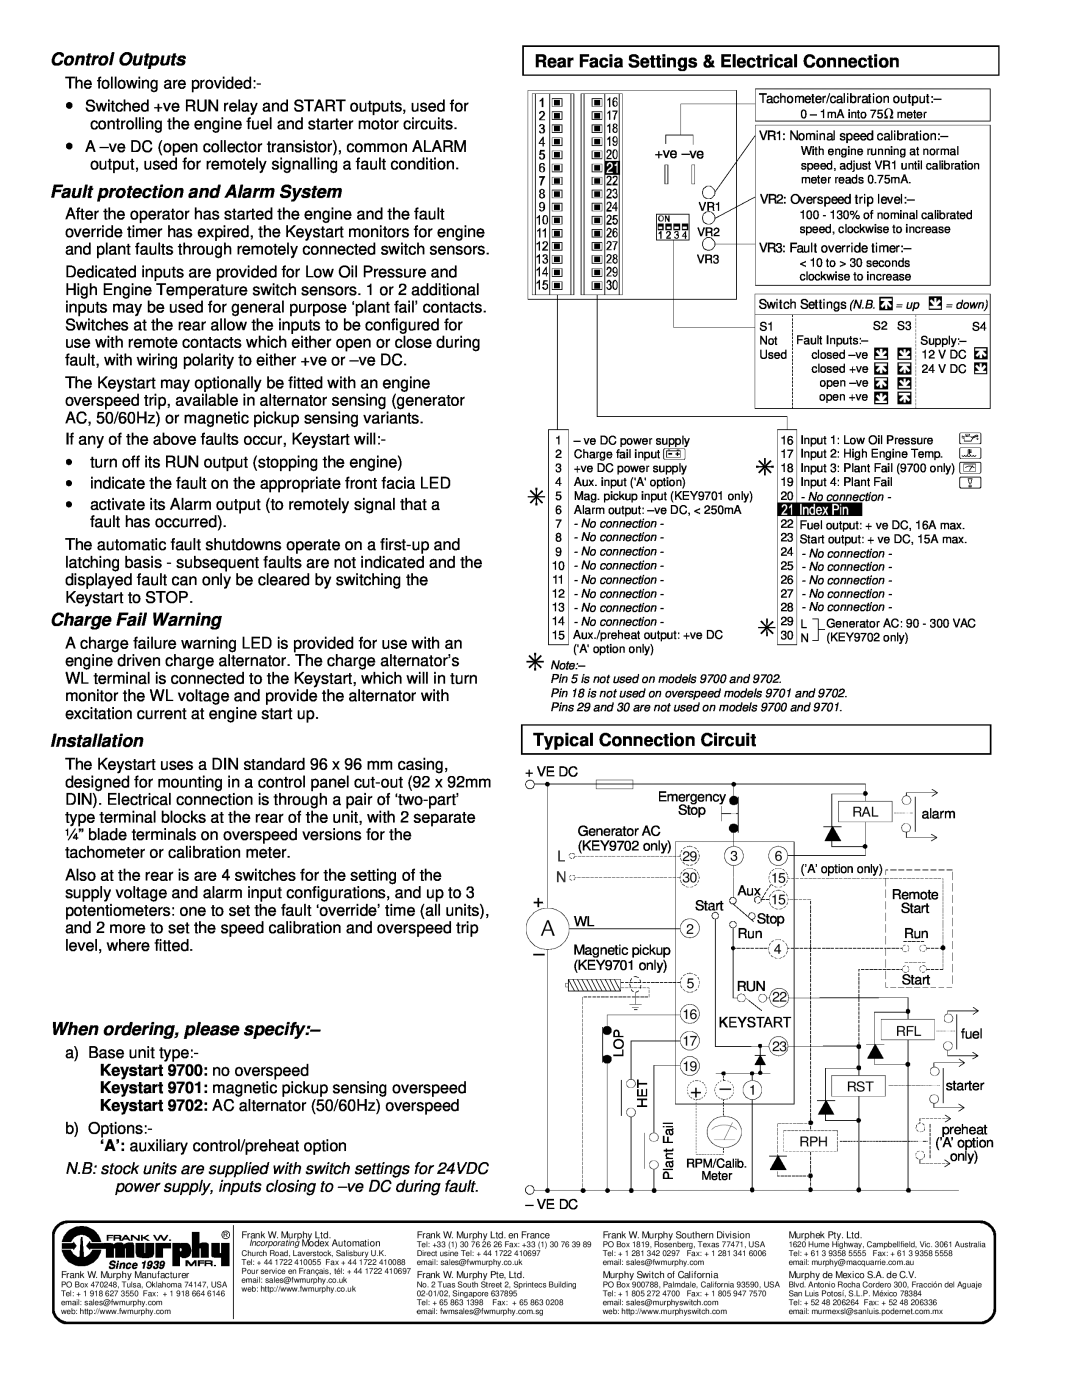 Murphy Keystart 9700 Rear Facia Settings & Electrical Connection, +ve -ve, Typical Connection Circuit, Control Outputs 